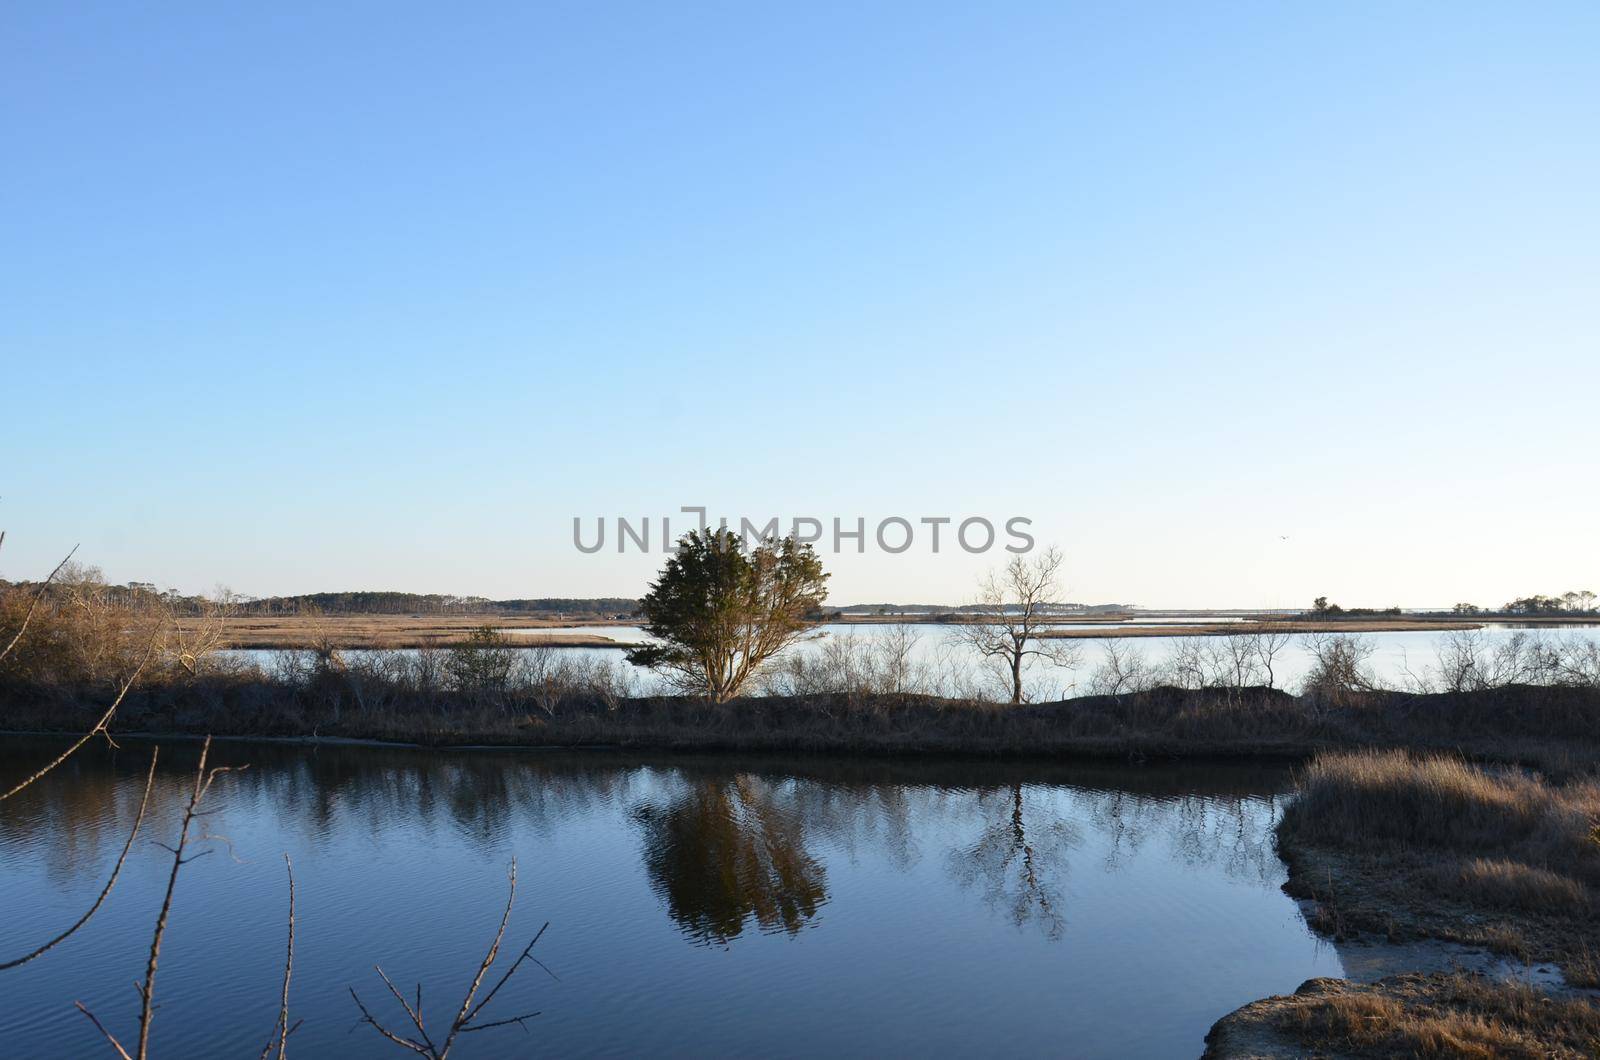 a lake or river with brown grasses or plants and shore